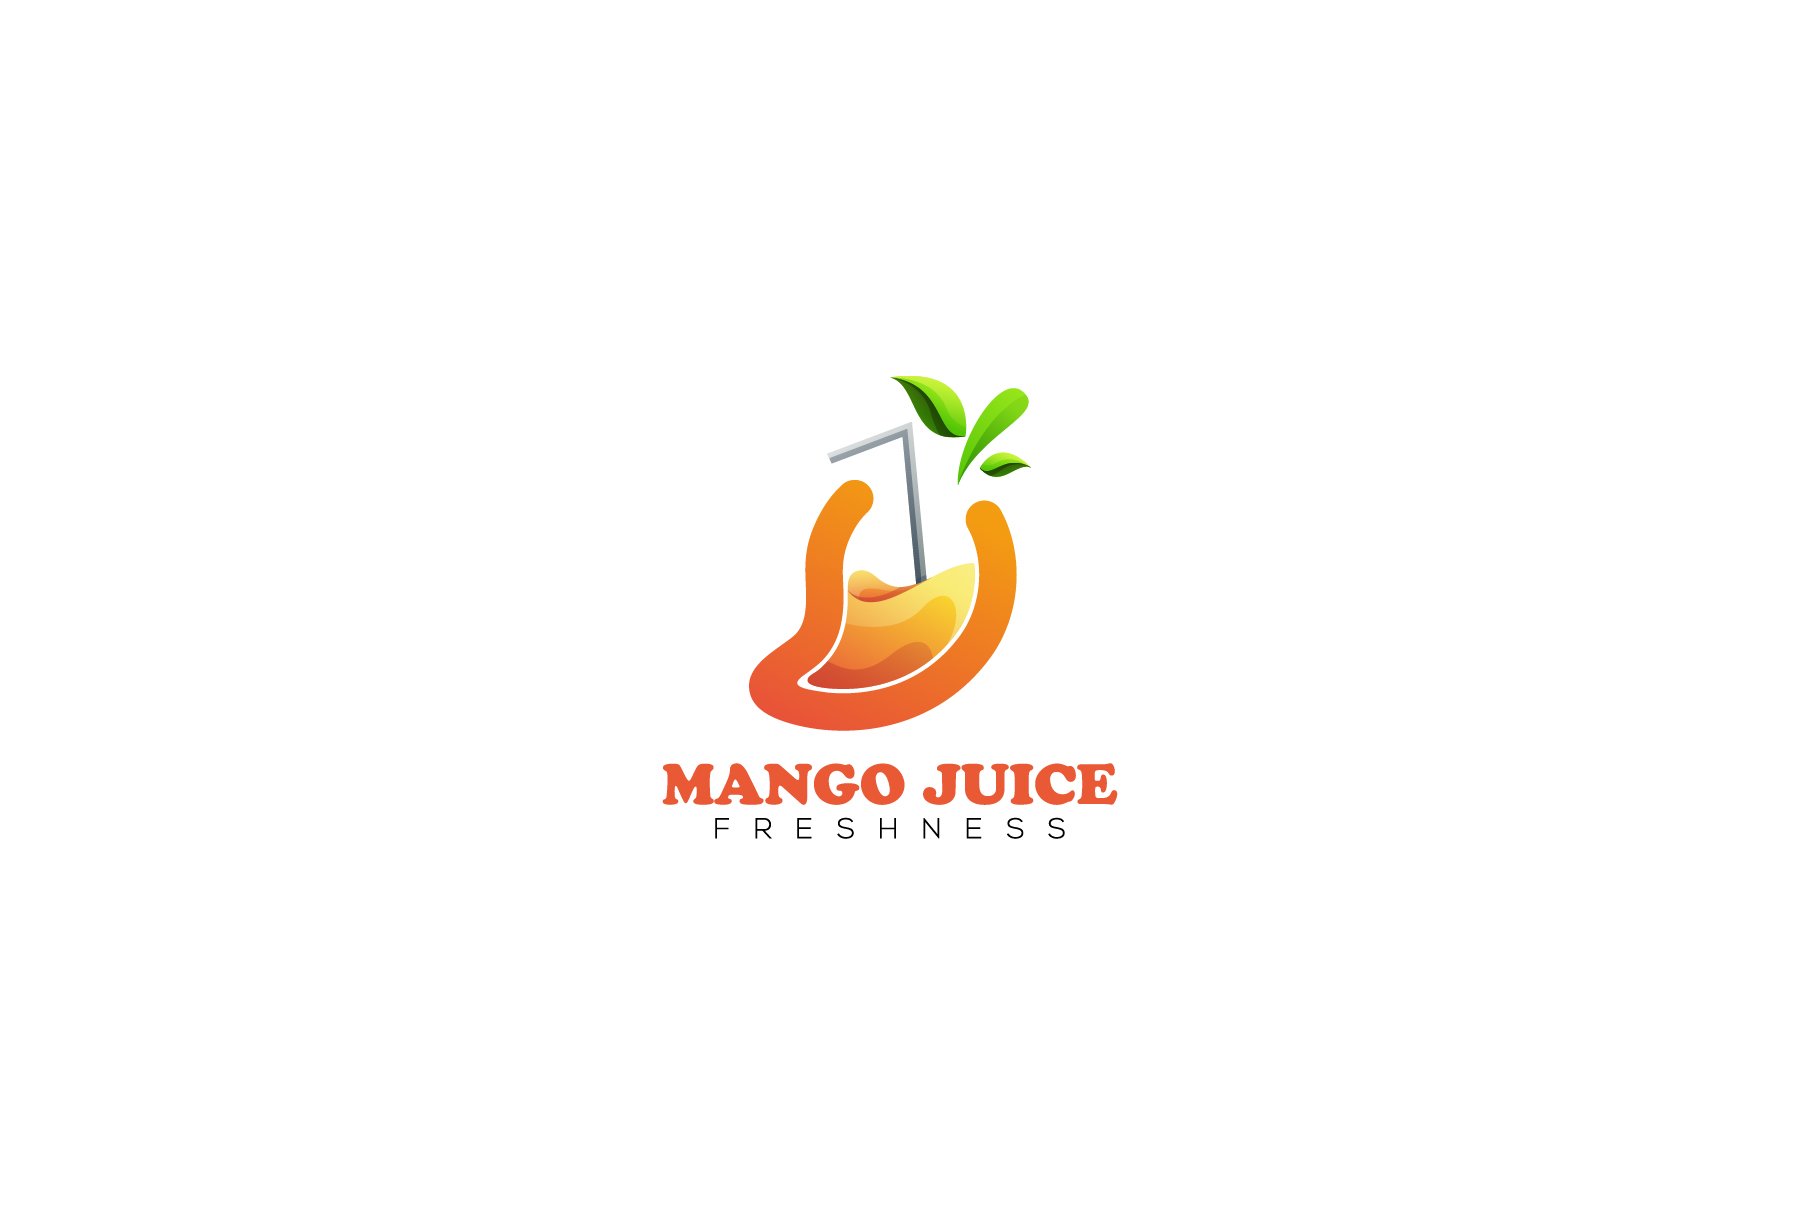 Mango Juice Modern Gradient Colorful cover image.